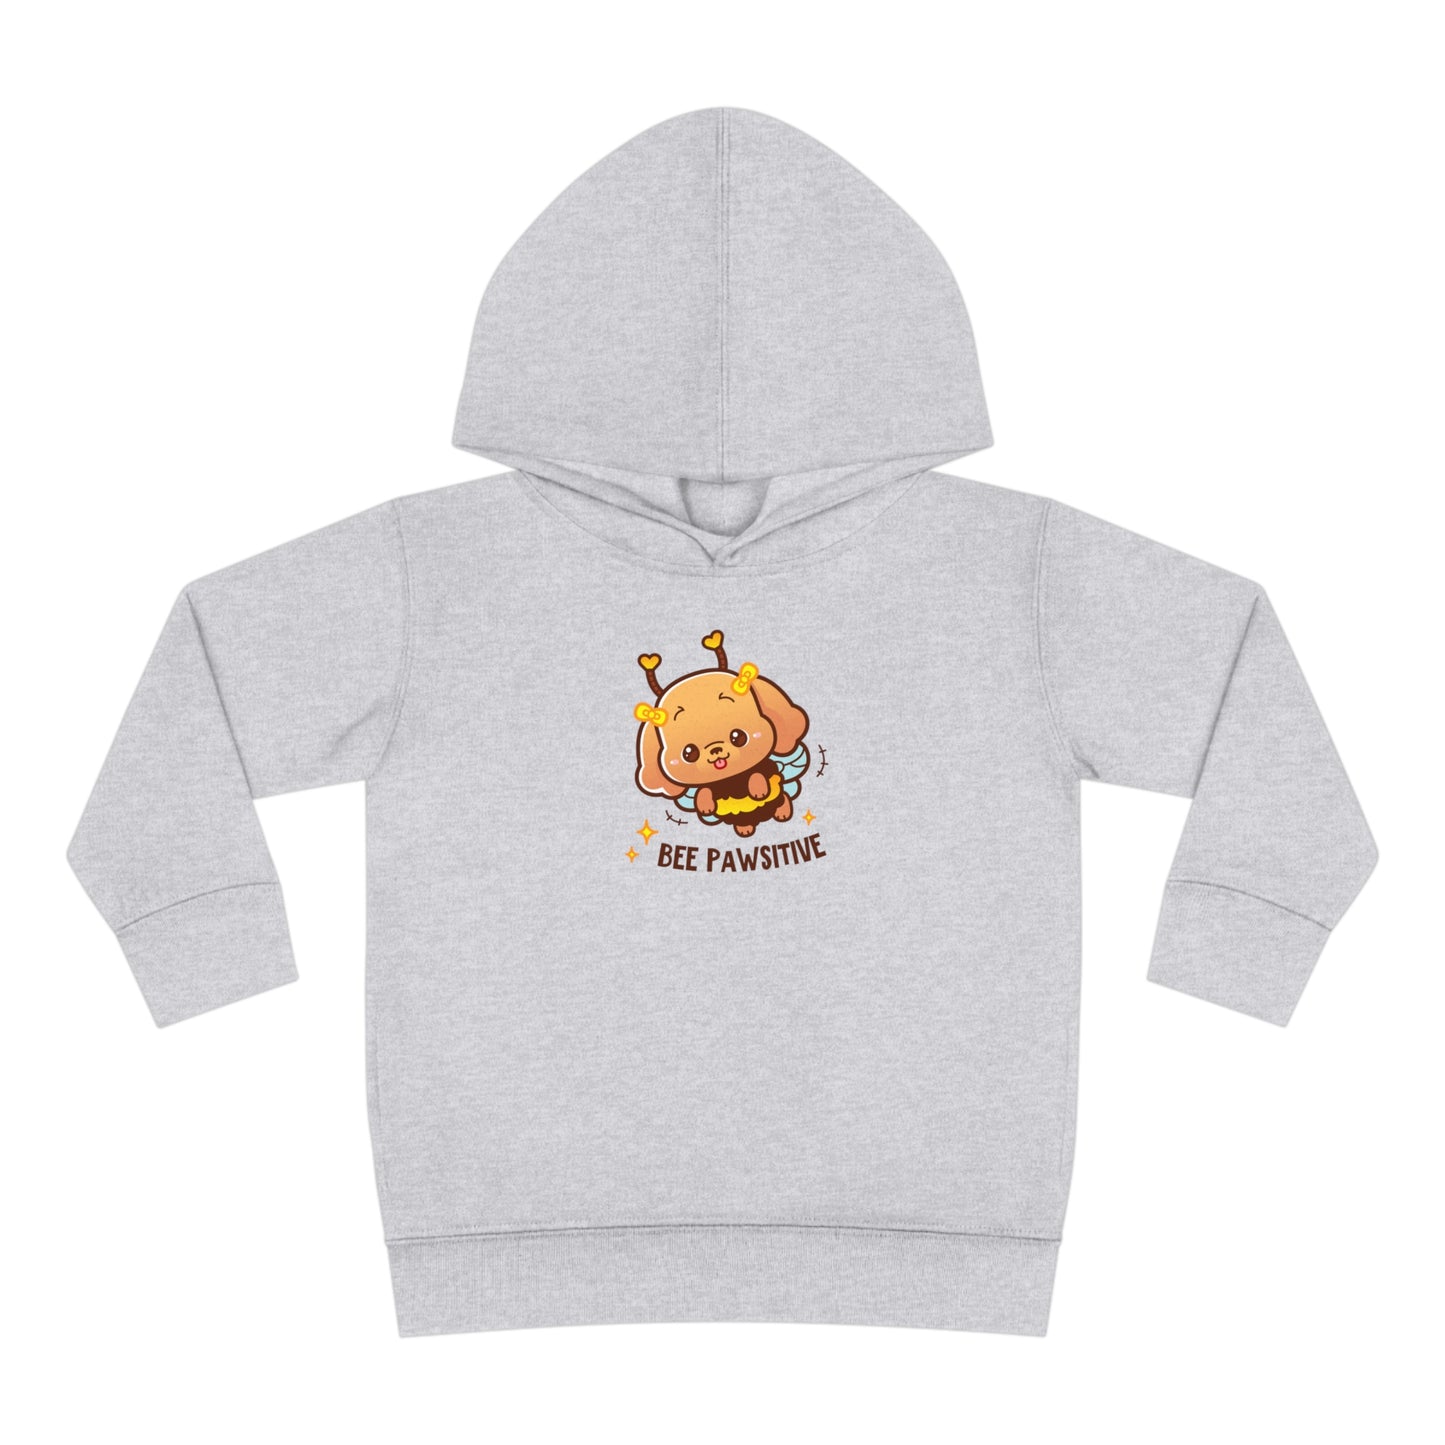 Bee Pawsitive Toddler Pullover Fleece Hoodie, Cute Dog Inspired Kids Hoodie, Be Positive Pullover For Toddlers, Gift For Toddler